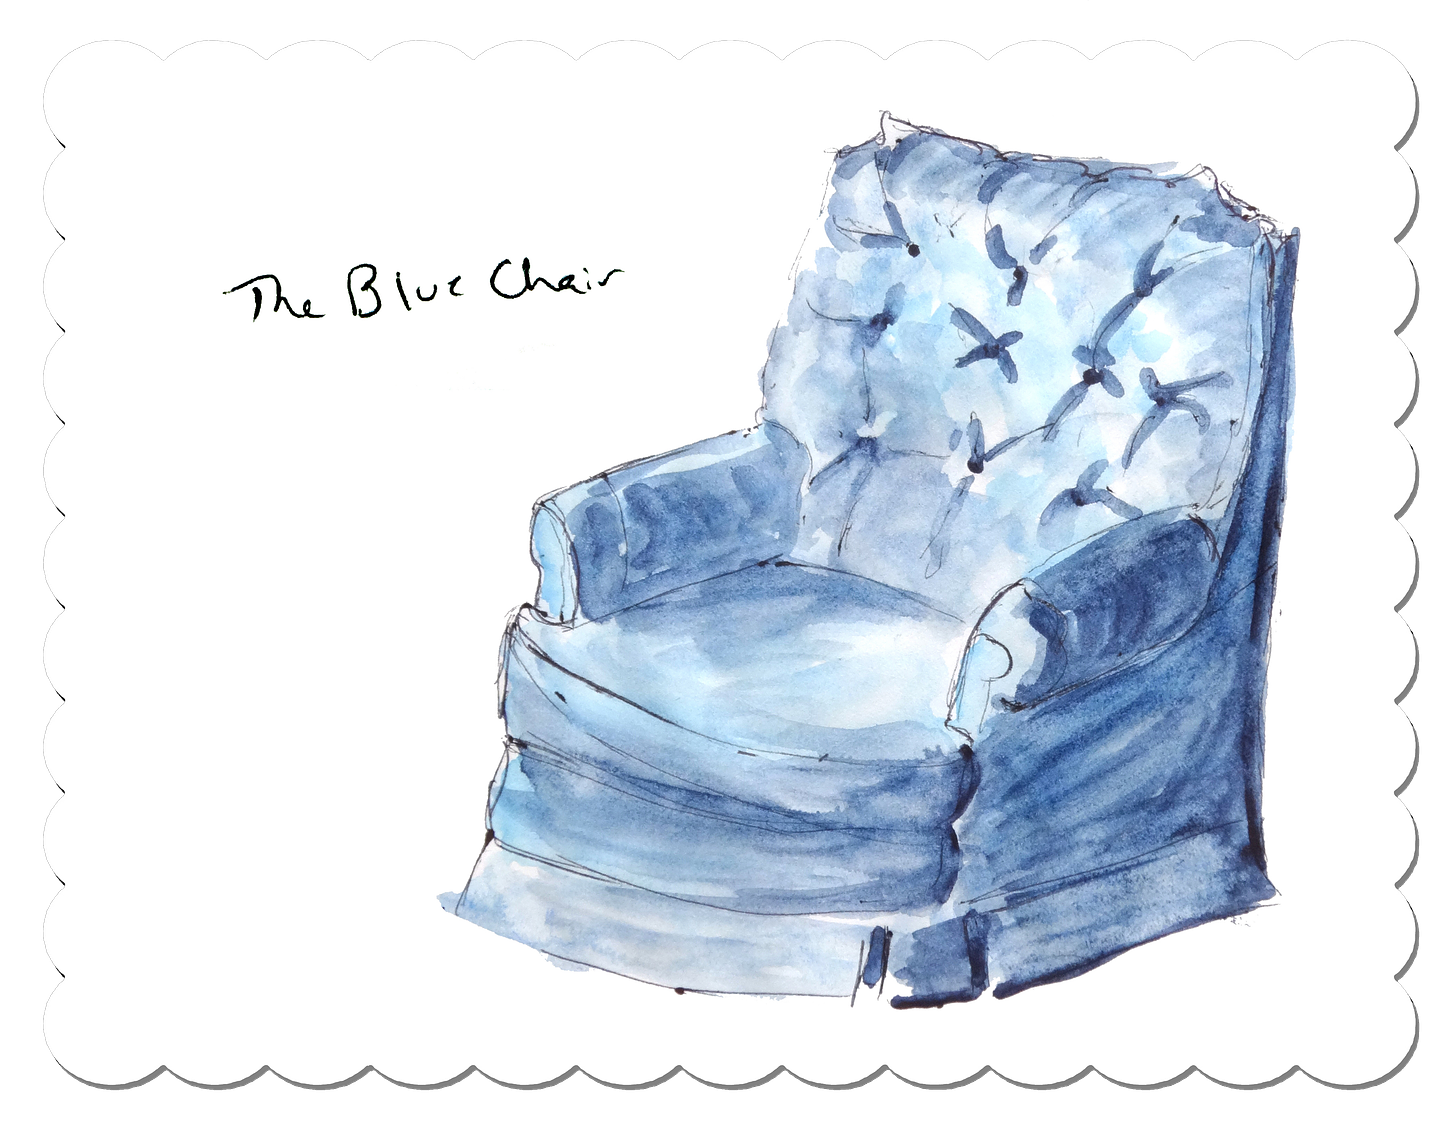 A watercolor sketch of an overstuffed blue chair with the words "The Blue Chair" to the side.